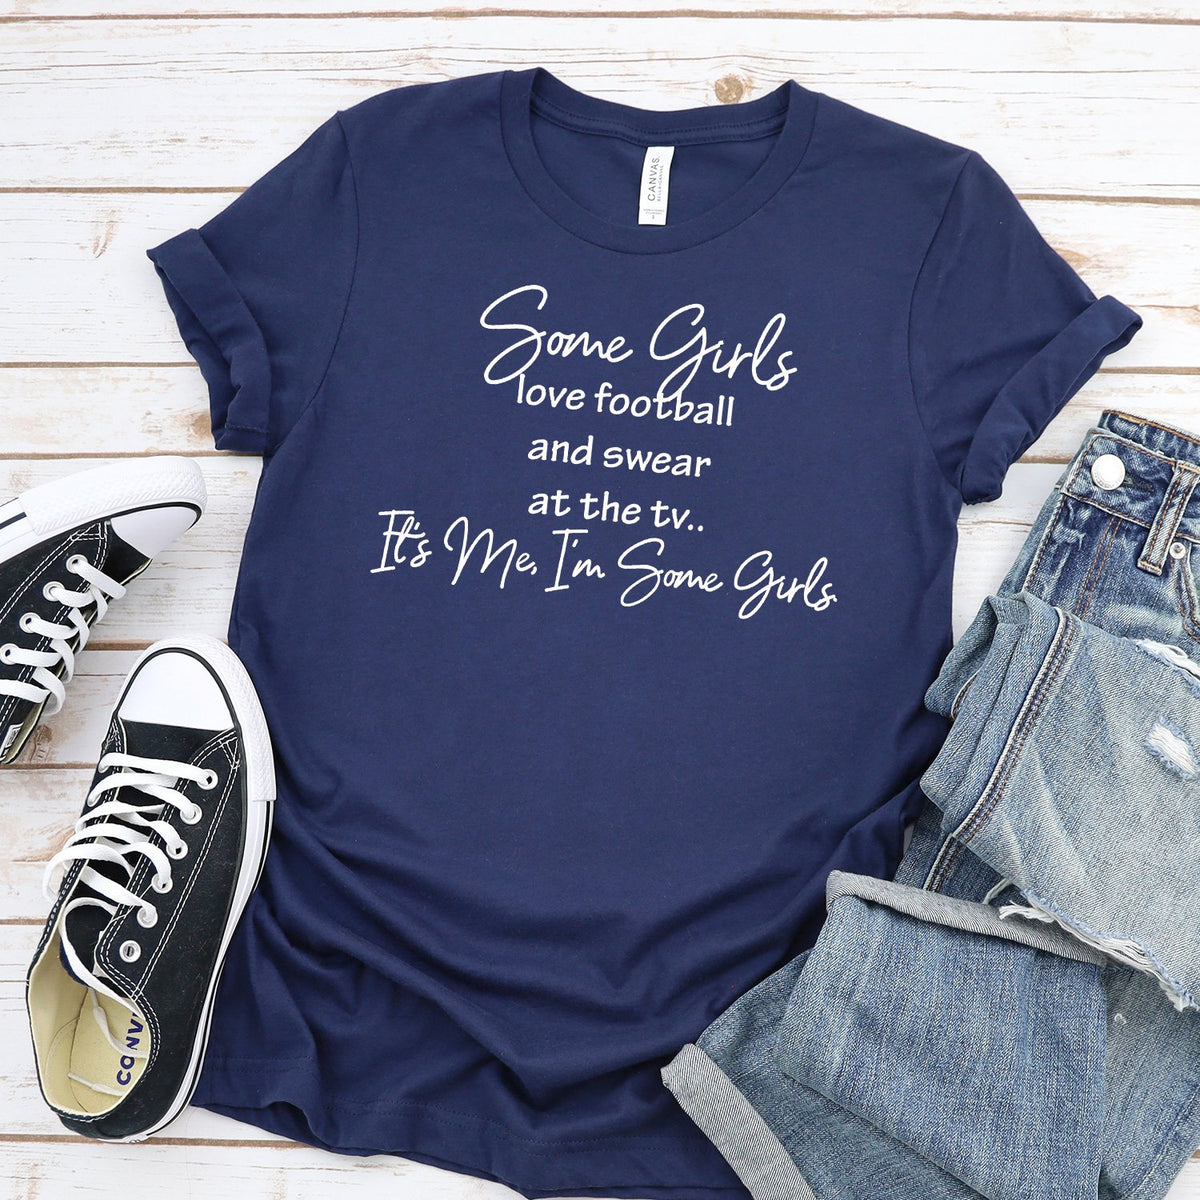 Some Girls Love Football and Swear at the TV - Short Sleeve Tee Shirt